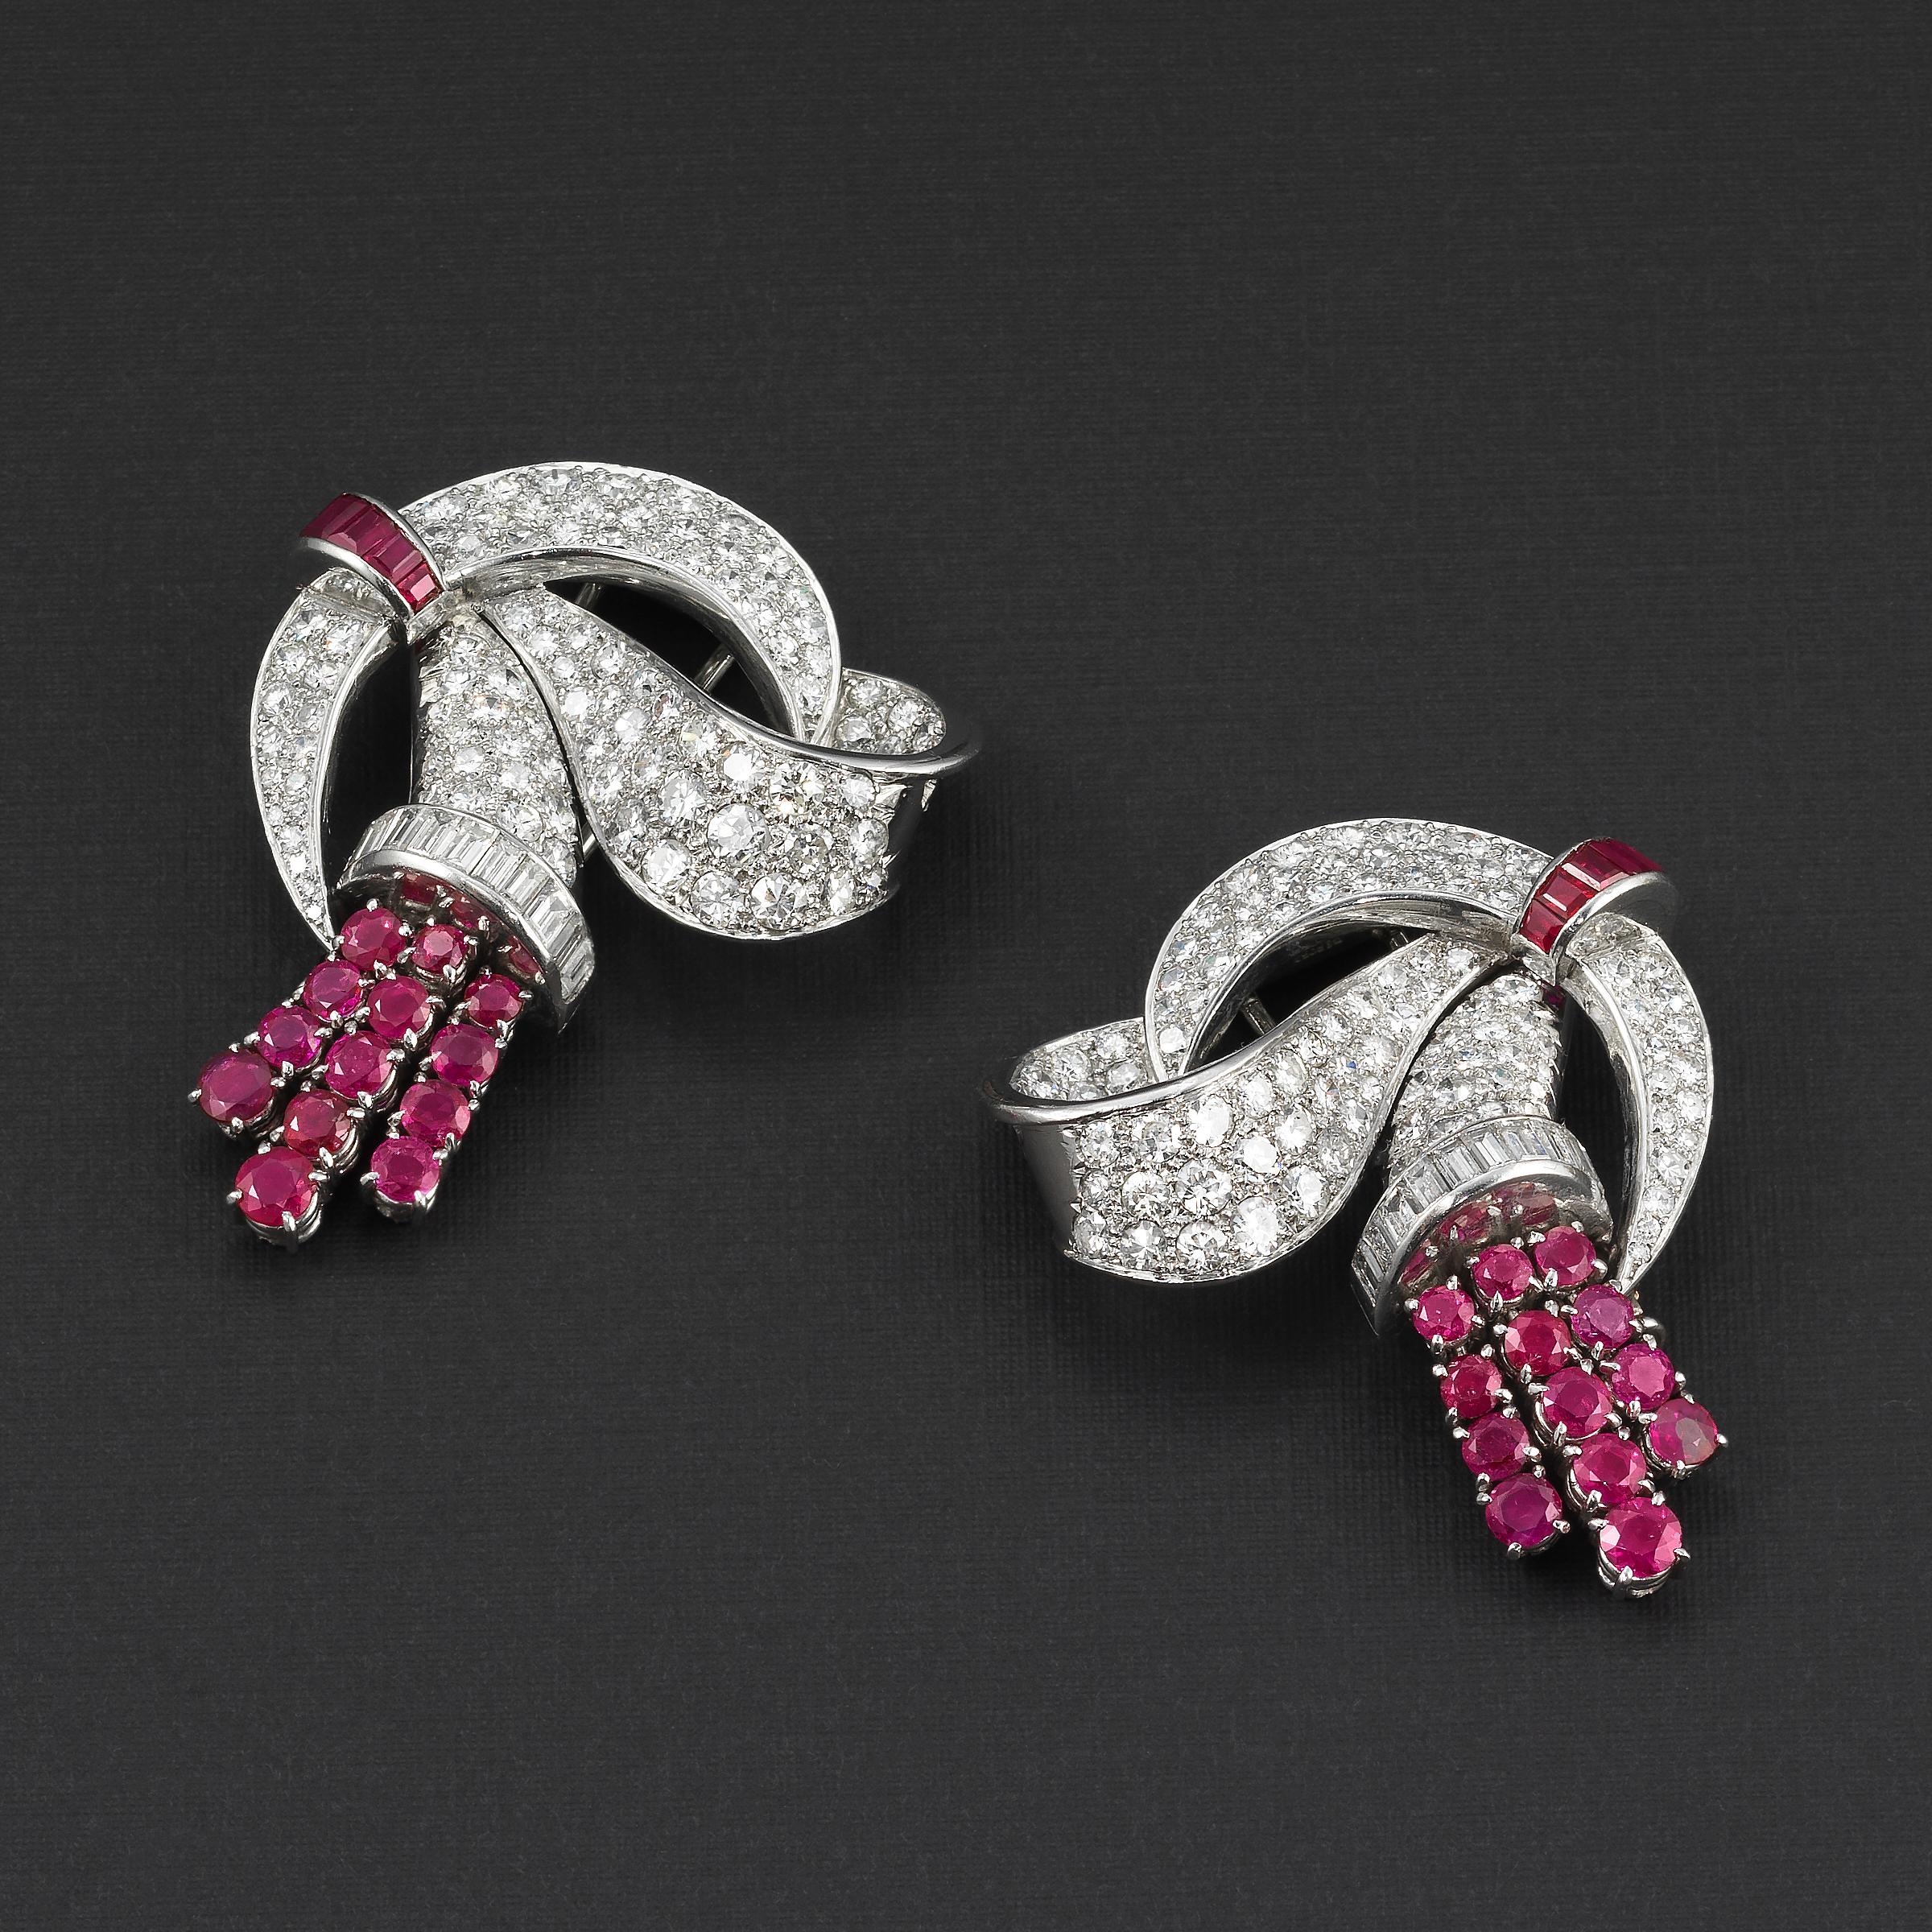 Exceptional pair of Lacloche Freres clip brooches (convertible to earrings) from the Art Deco prime 1930s period featuring diamonds and Burma rubies set in platinum and 18K white gold:
- Highly important and one-of-a-kind Art Deco creation from the